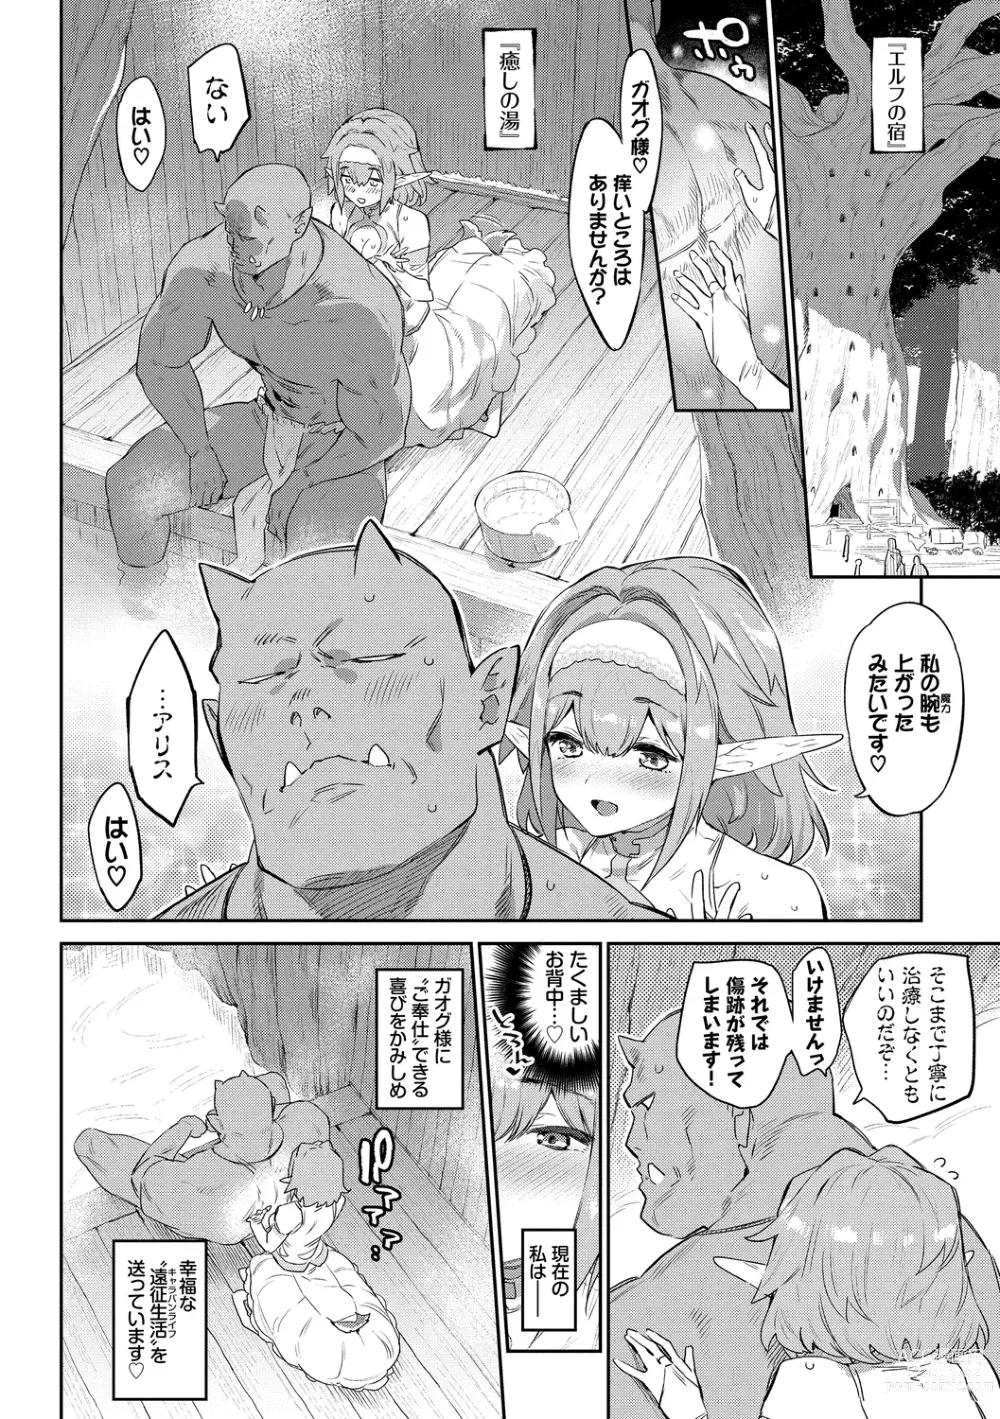 Page 6 of manga Ihou no Otome - Monster Girls in Another World